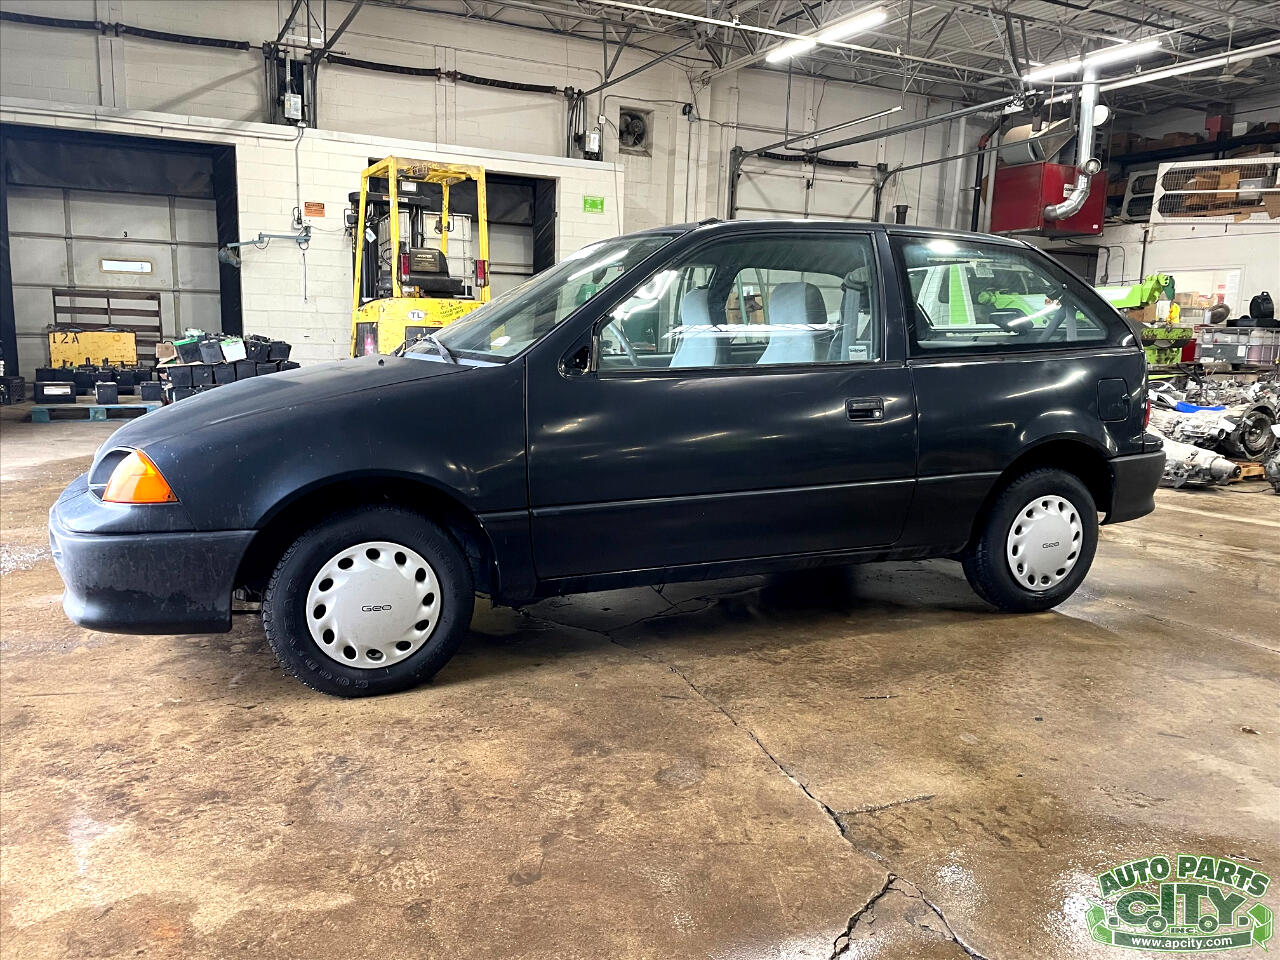 Used 1993 Geo Metro 2-Door hatchback for Sale in Park City IL 60085 Classic  Car City